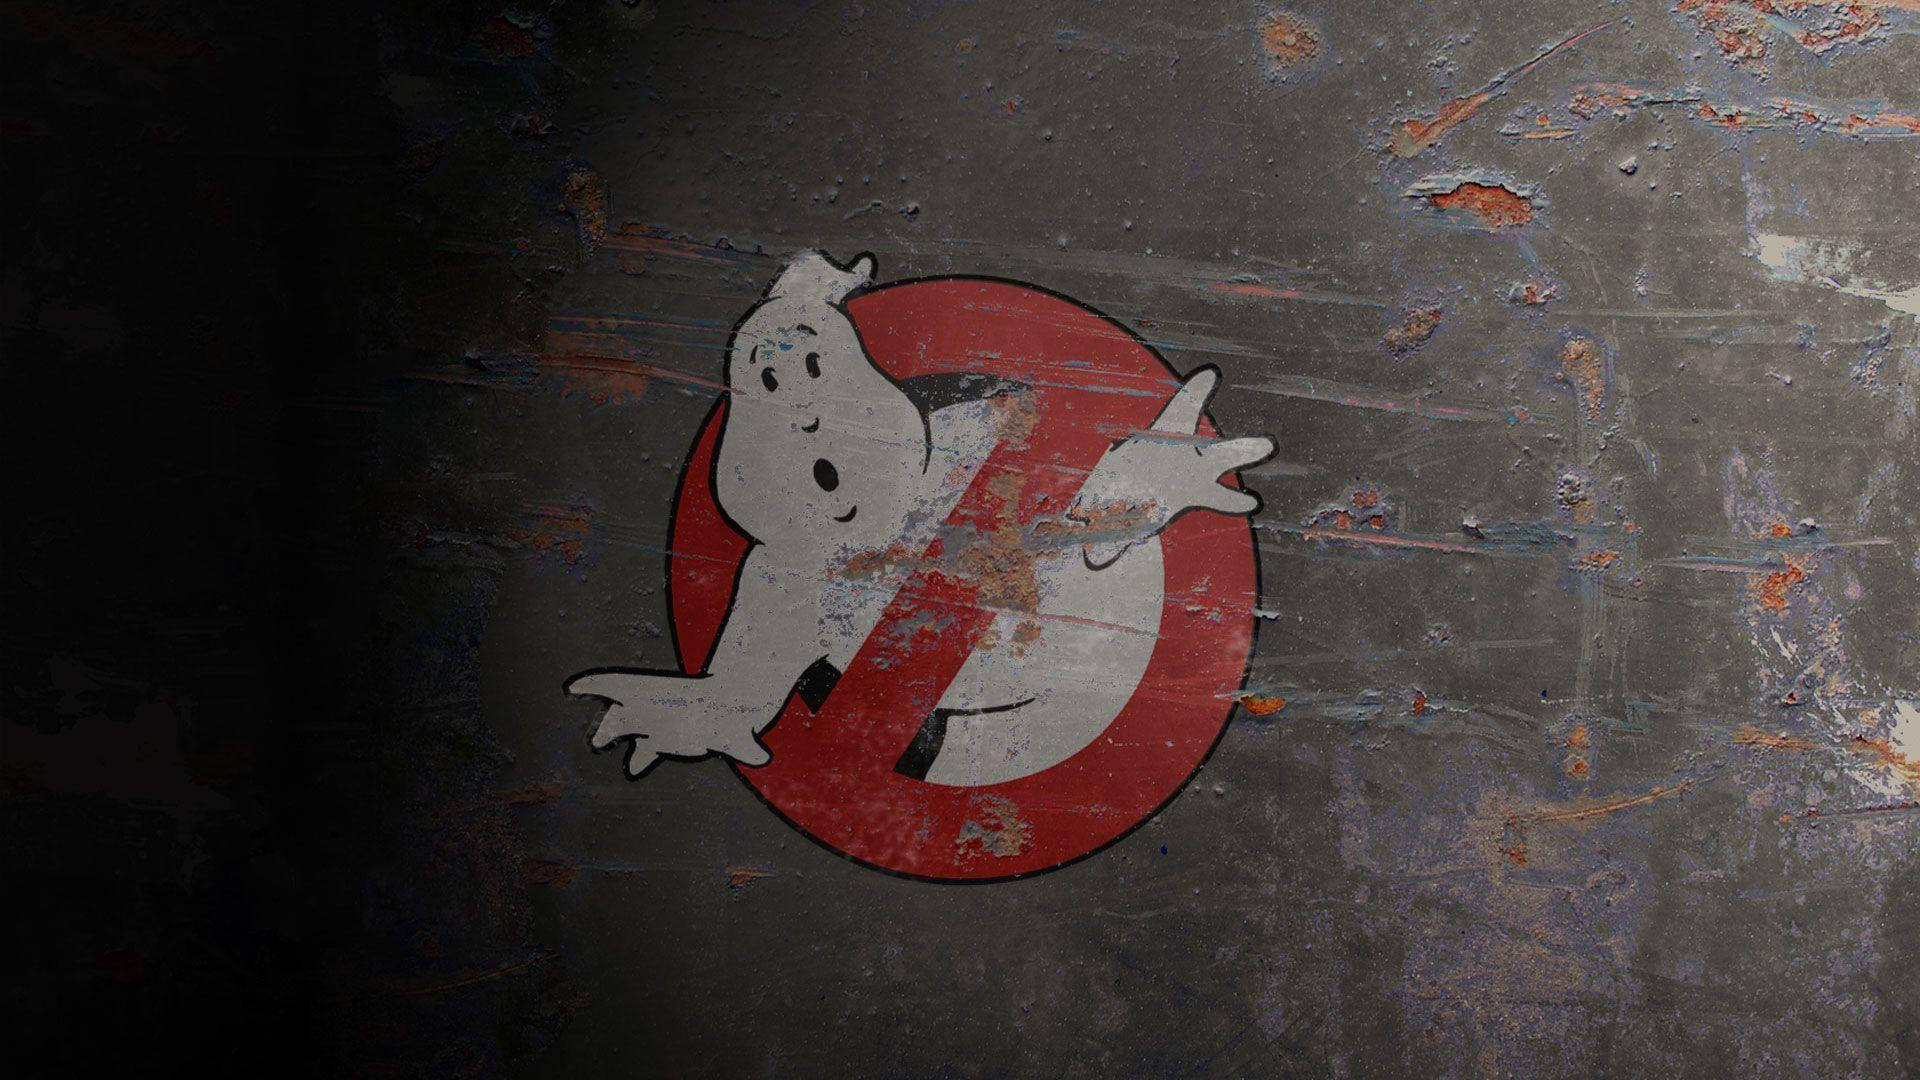 The Damaged Logo Of The Iconic Film Ghostbusters